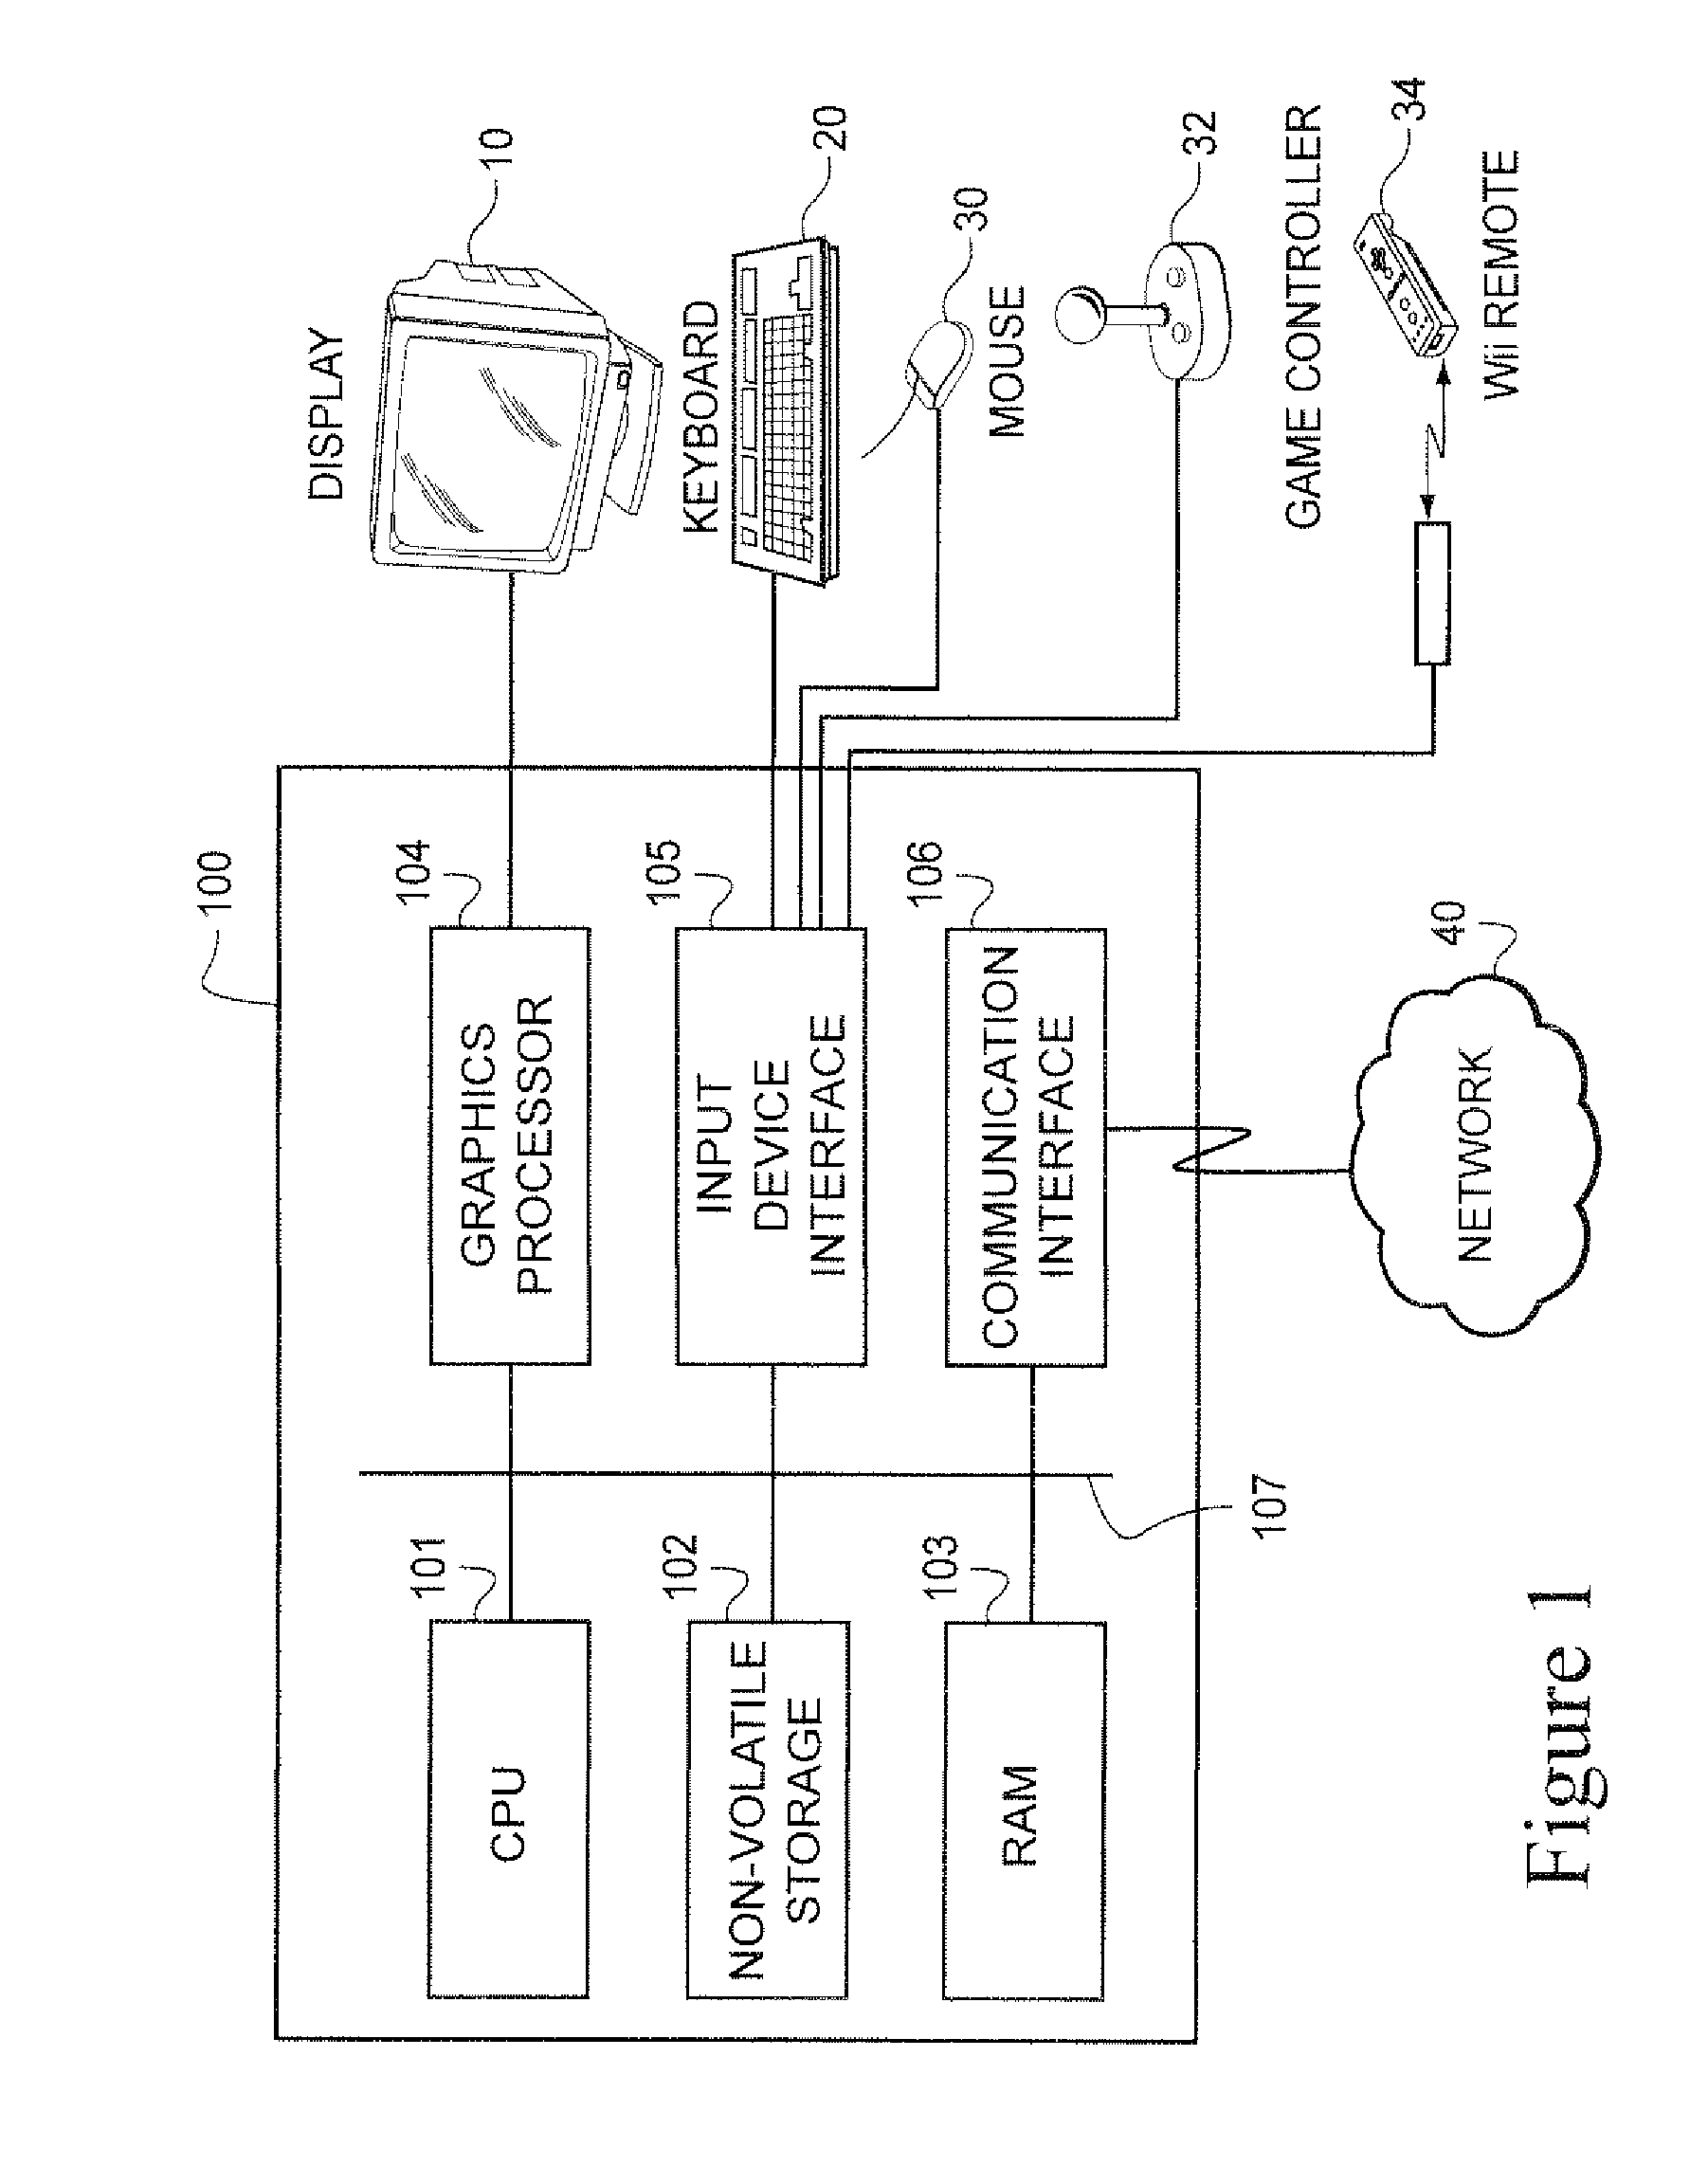 Method and apparatus for enhancing comprehension of code time complexity and flow